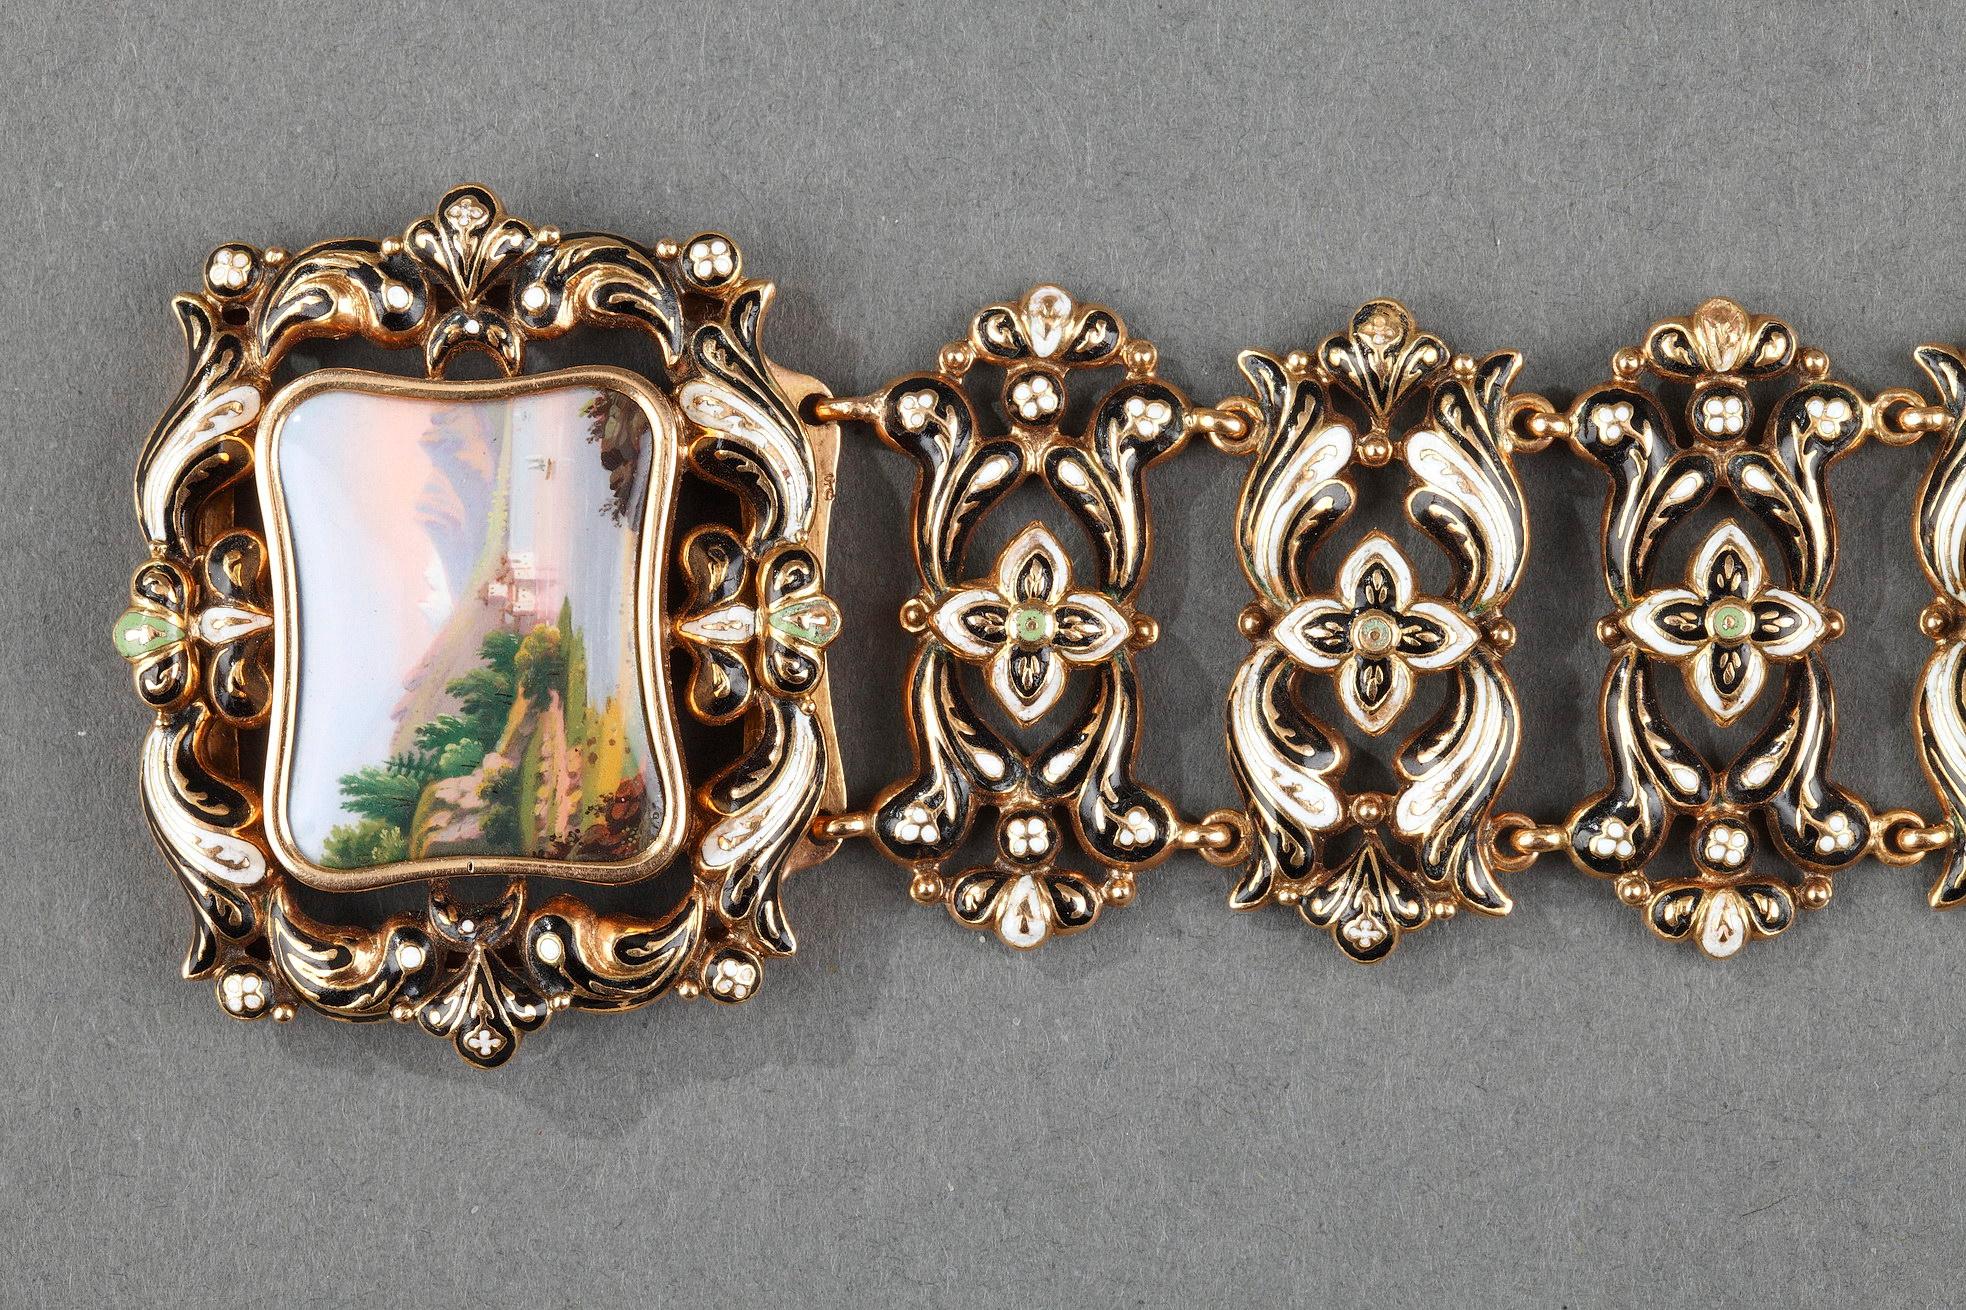 Gold and enamel bracelet. The bracelet is composed of nine symmetrical medallions decorated with foliage and stylized flowers and accented with black and white enamel. The clasp is hidden by a rectangular medallion in enameled gold that features a